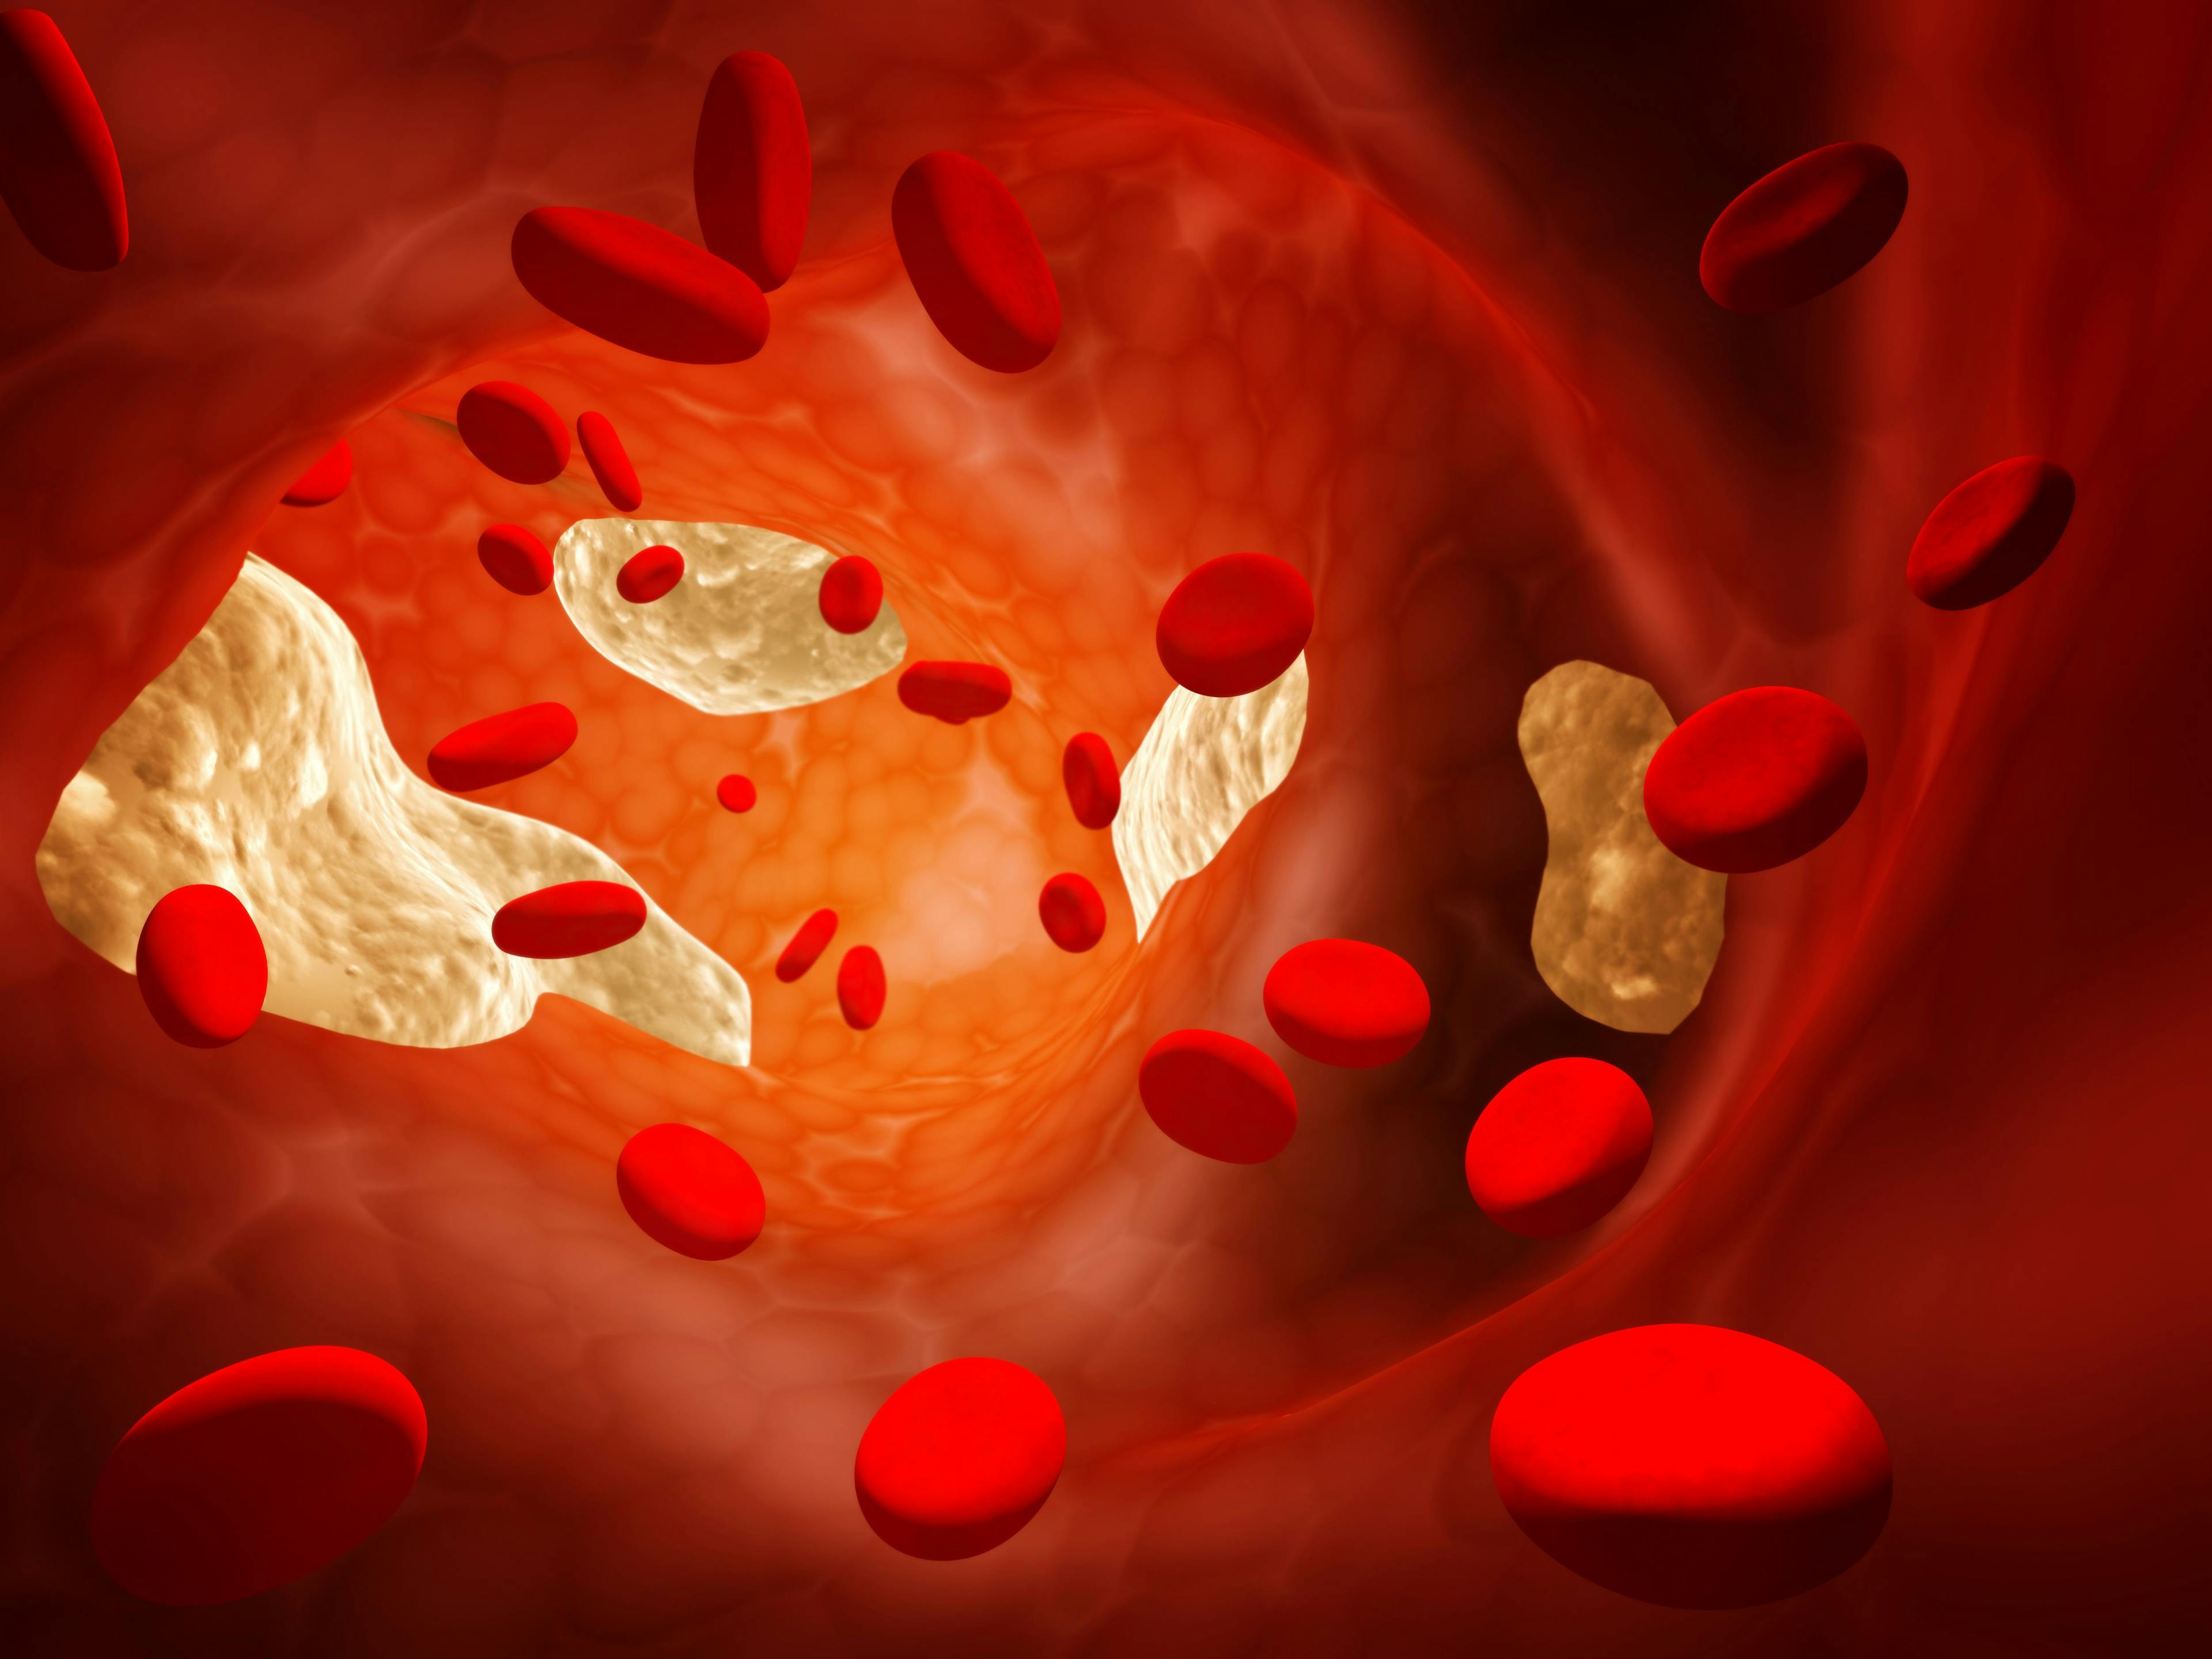 Illustration of blood cells and cholesterol